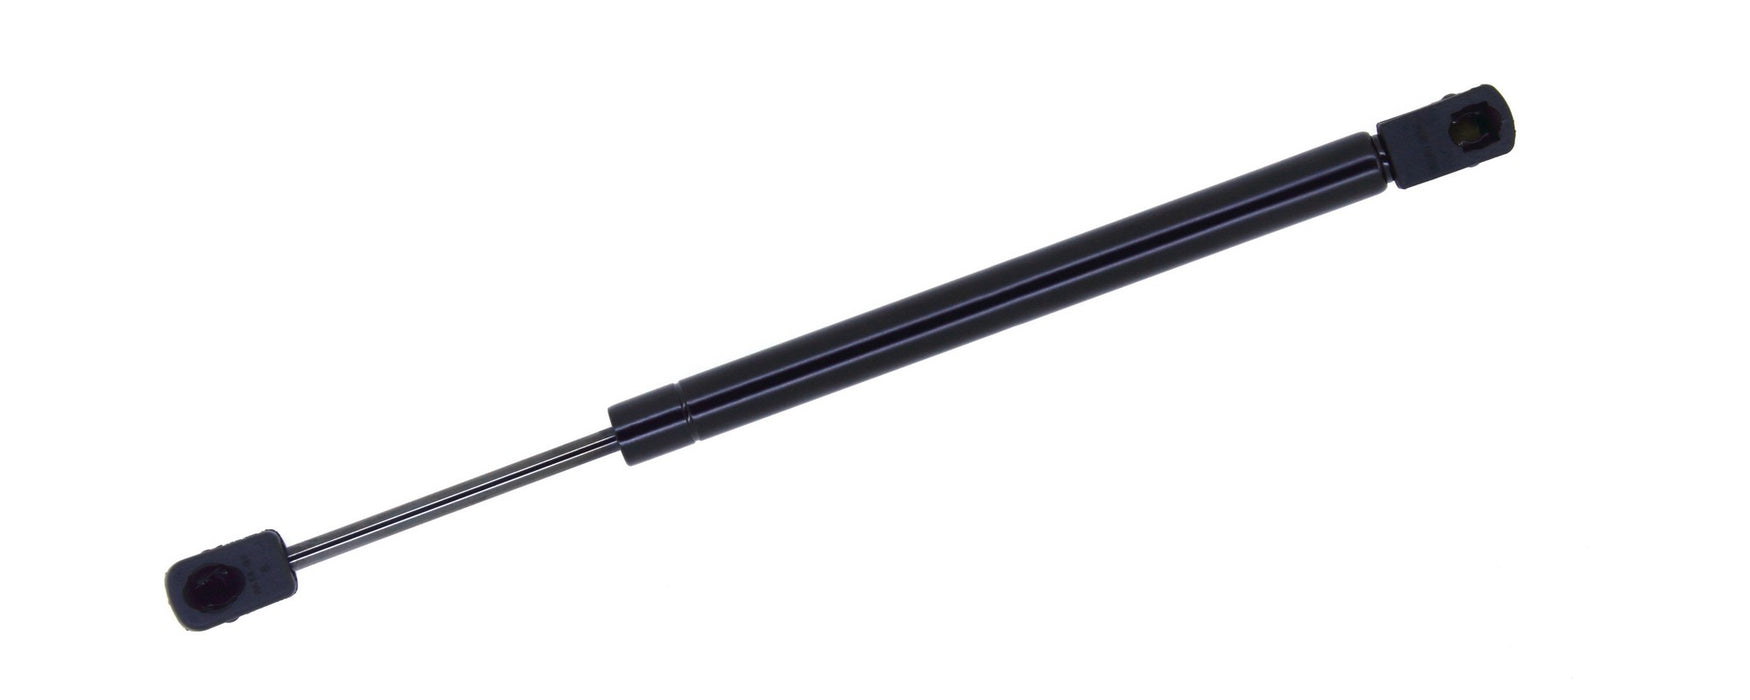 Hatch Lift Support for Nissan Xterra 2015 2014 2013 2012 2011 2010 2009 2008 2007 2006 2005 - StrongArm 6911